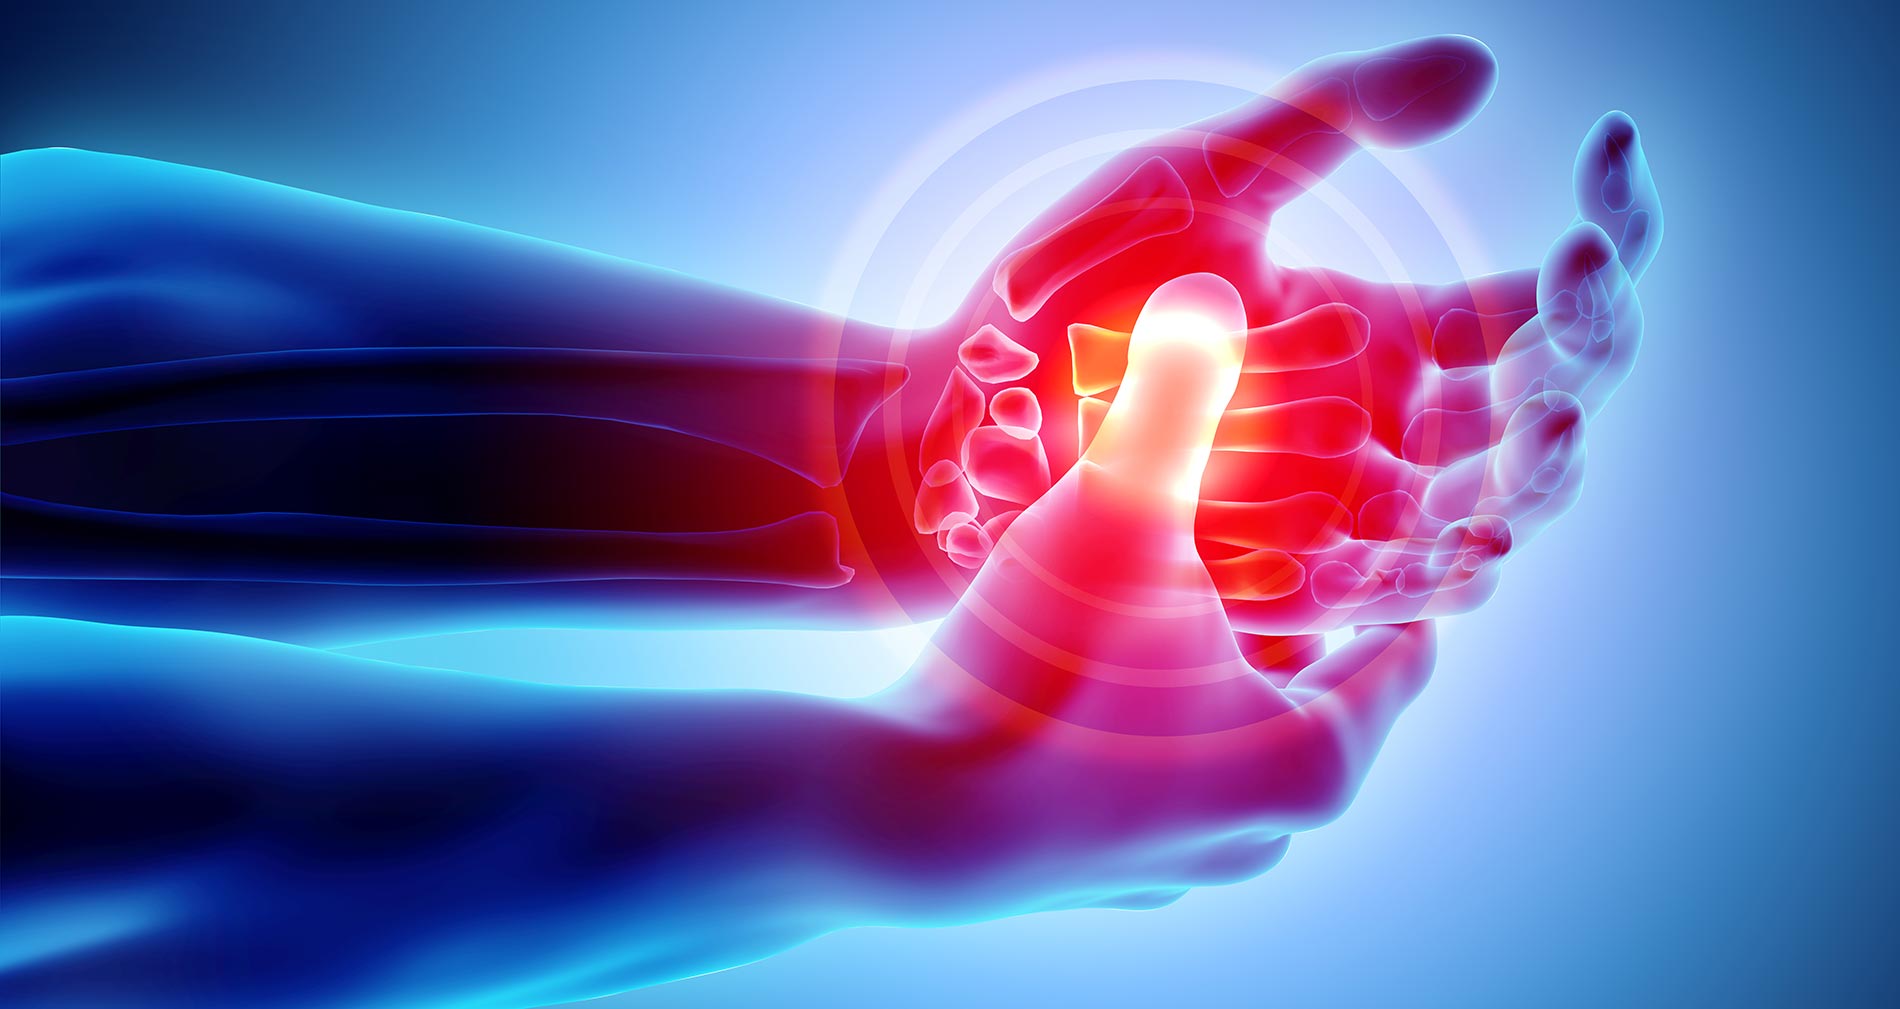 Image of hand with carpal tunnel syndrome pain